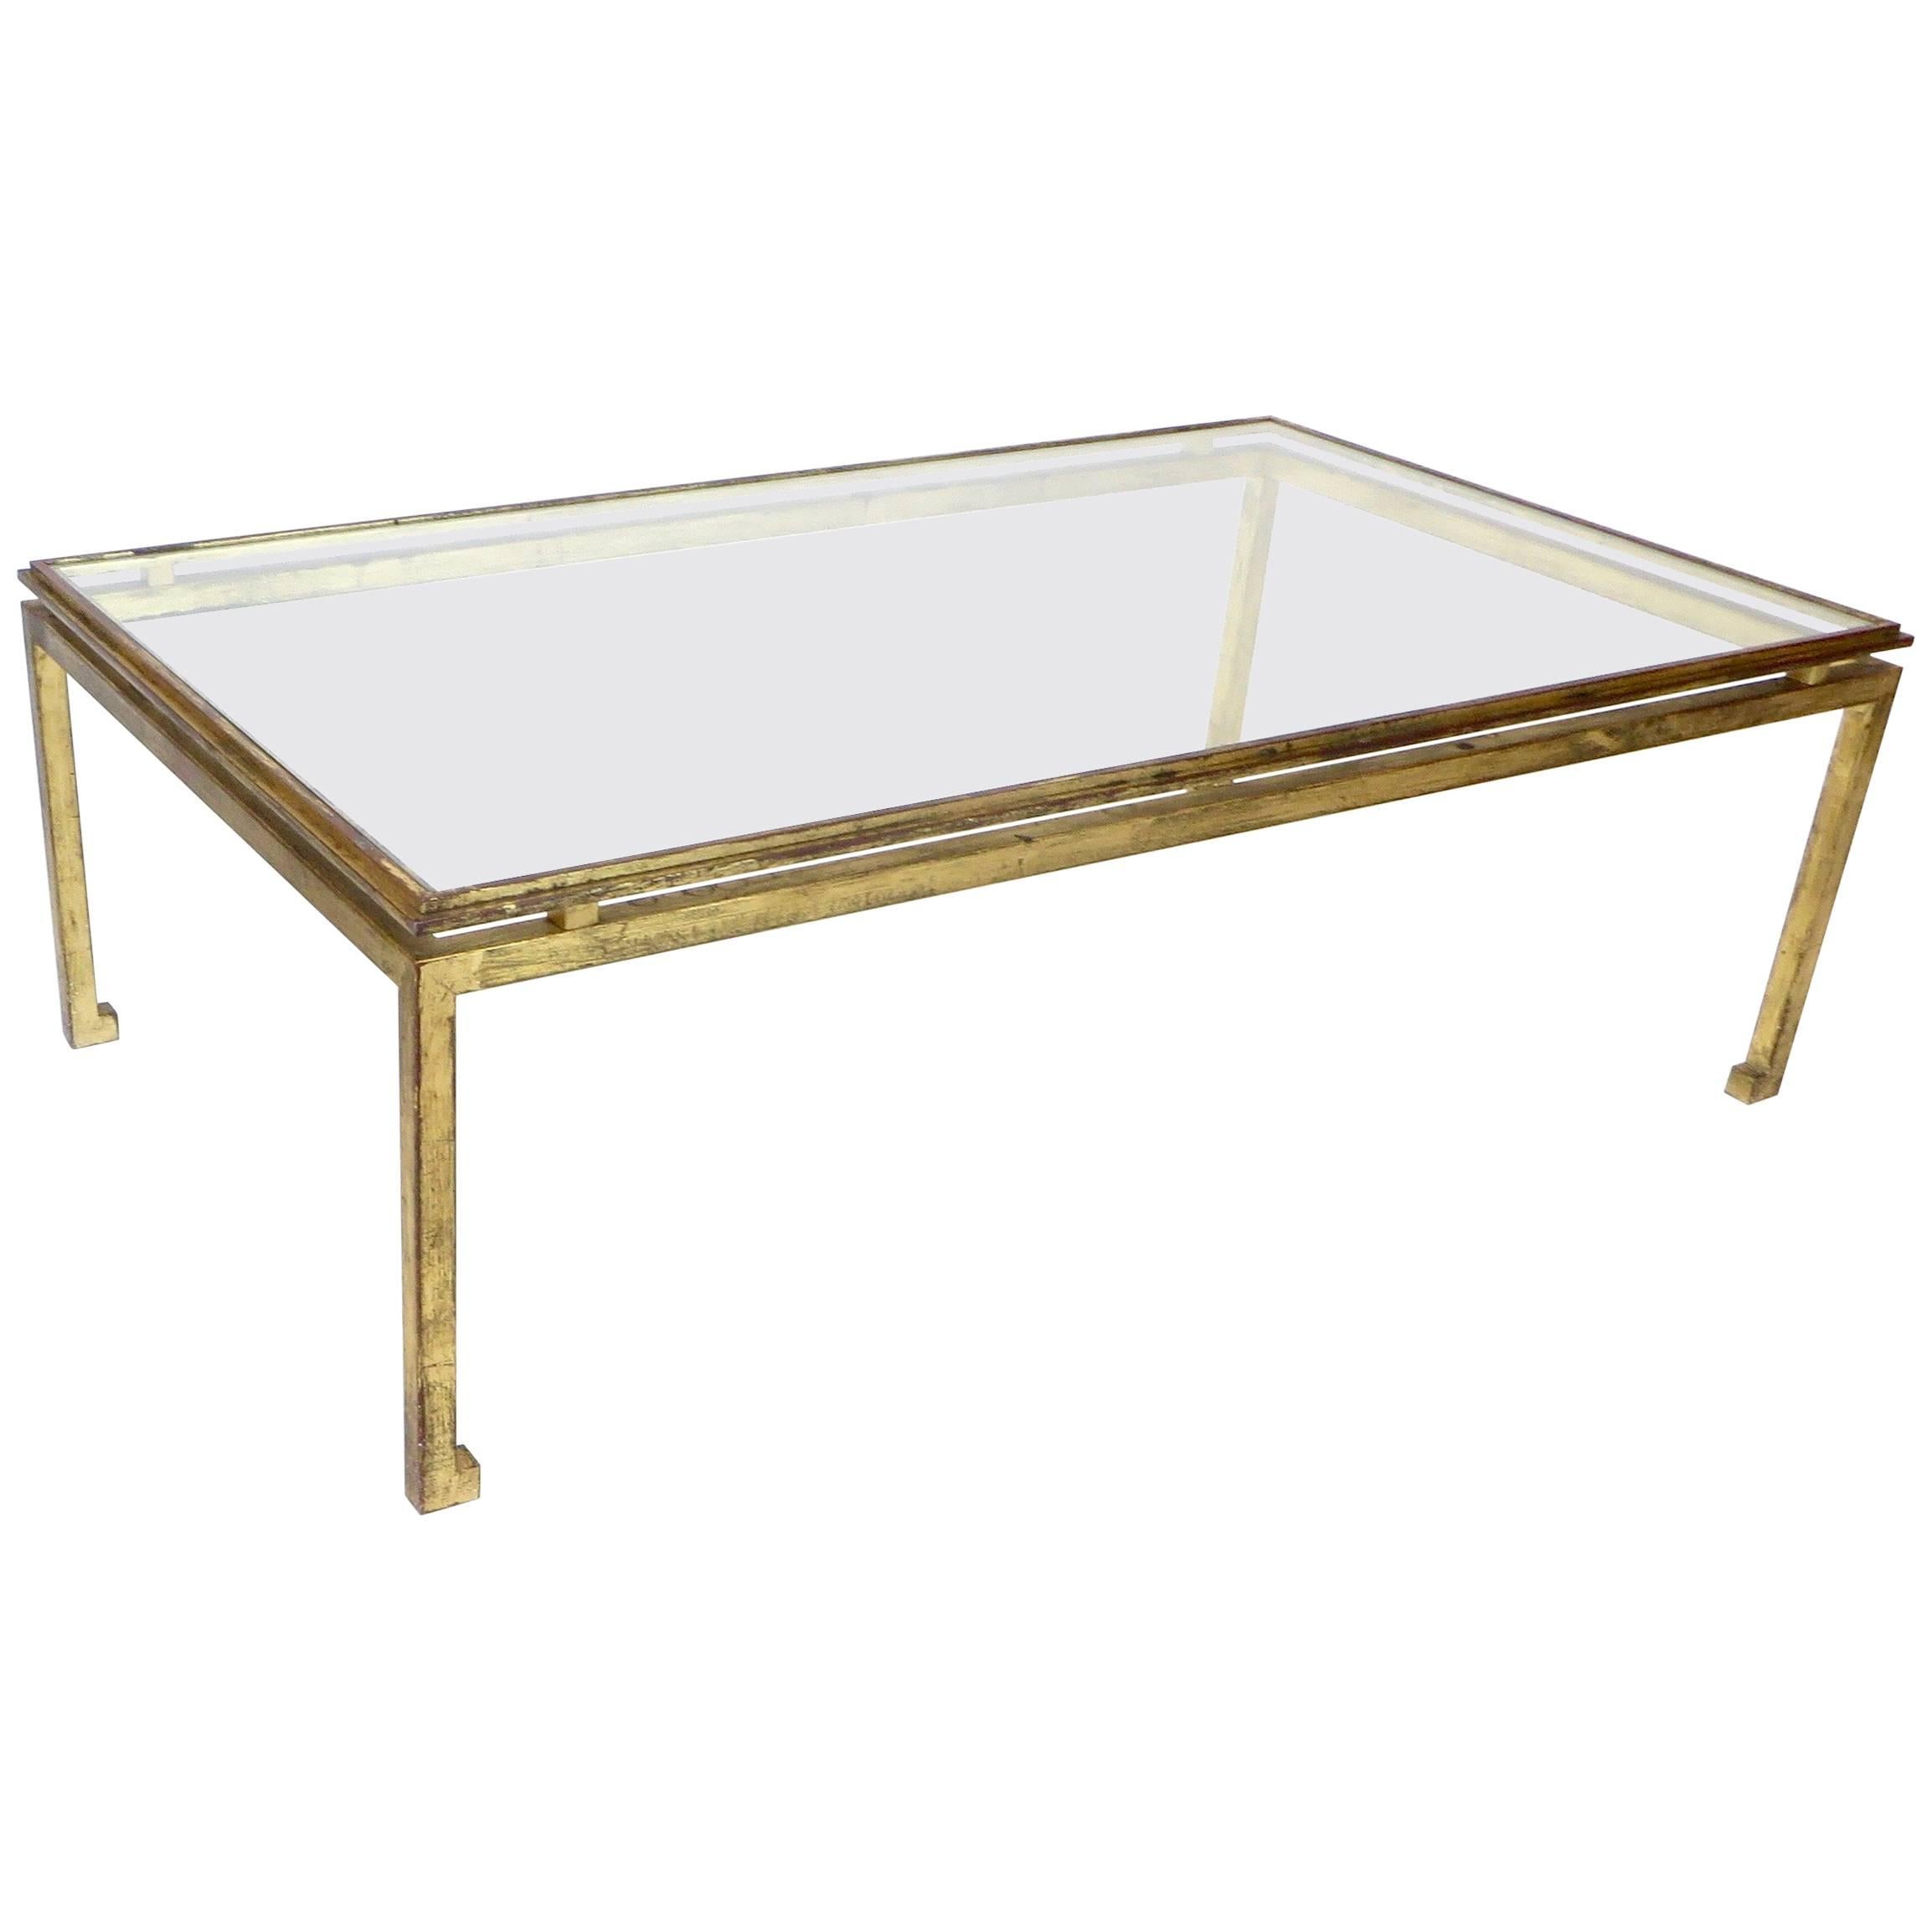 French Maison Ramsay Gilded Iron and St. Gobain Glass Plateau Coffee Table